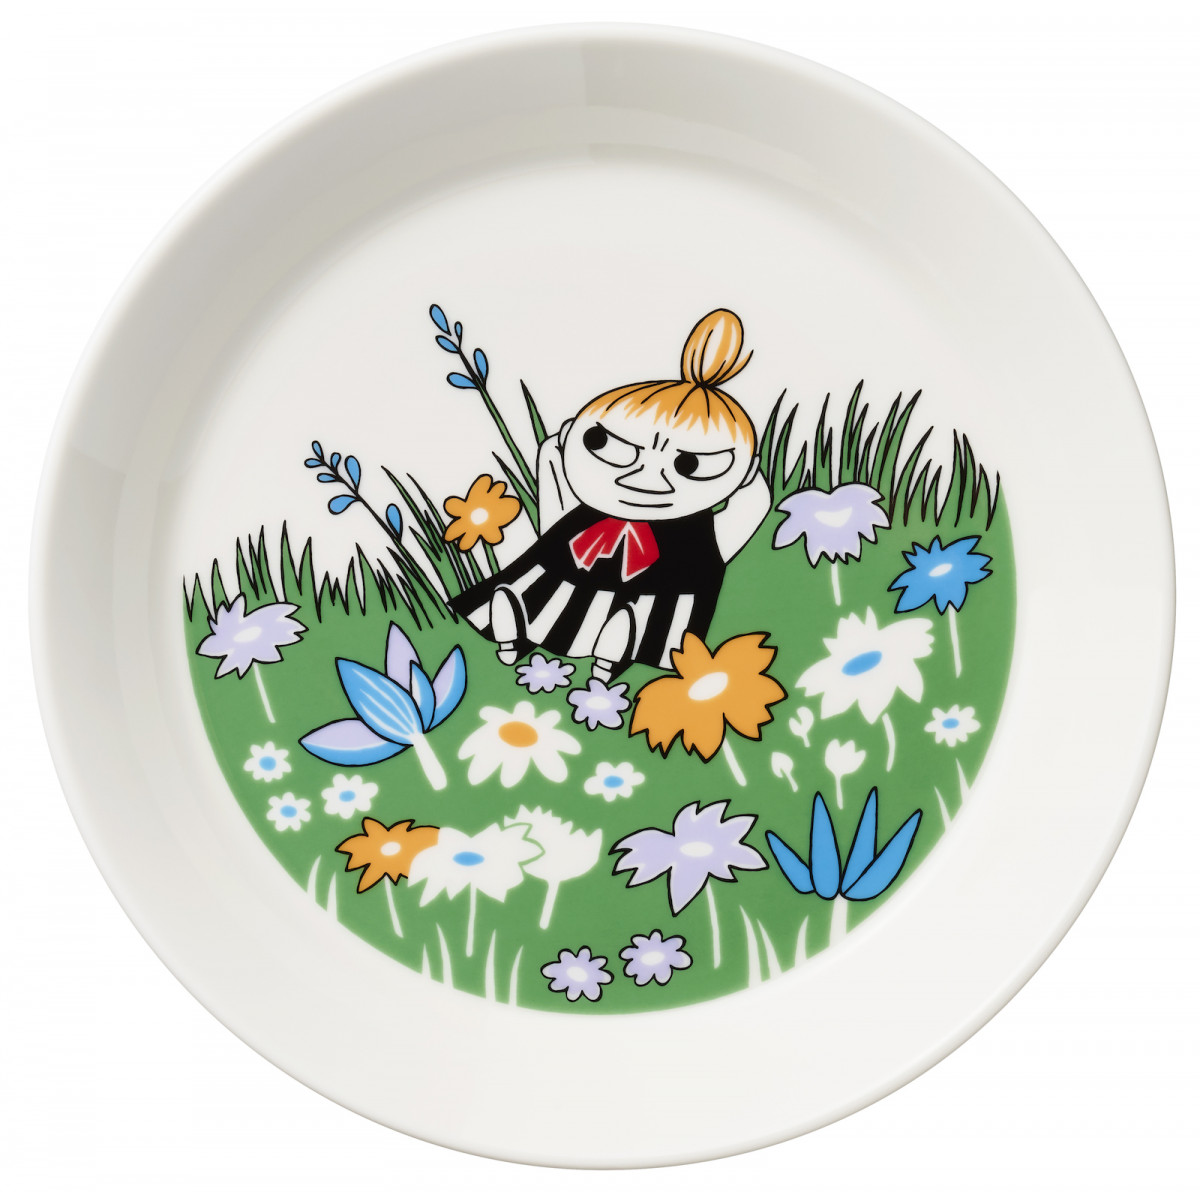 Little my and meadow - Moomin plate